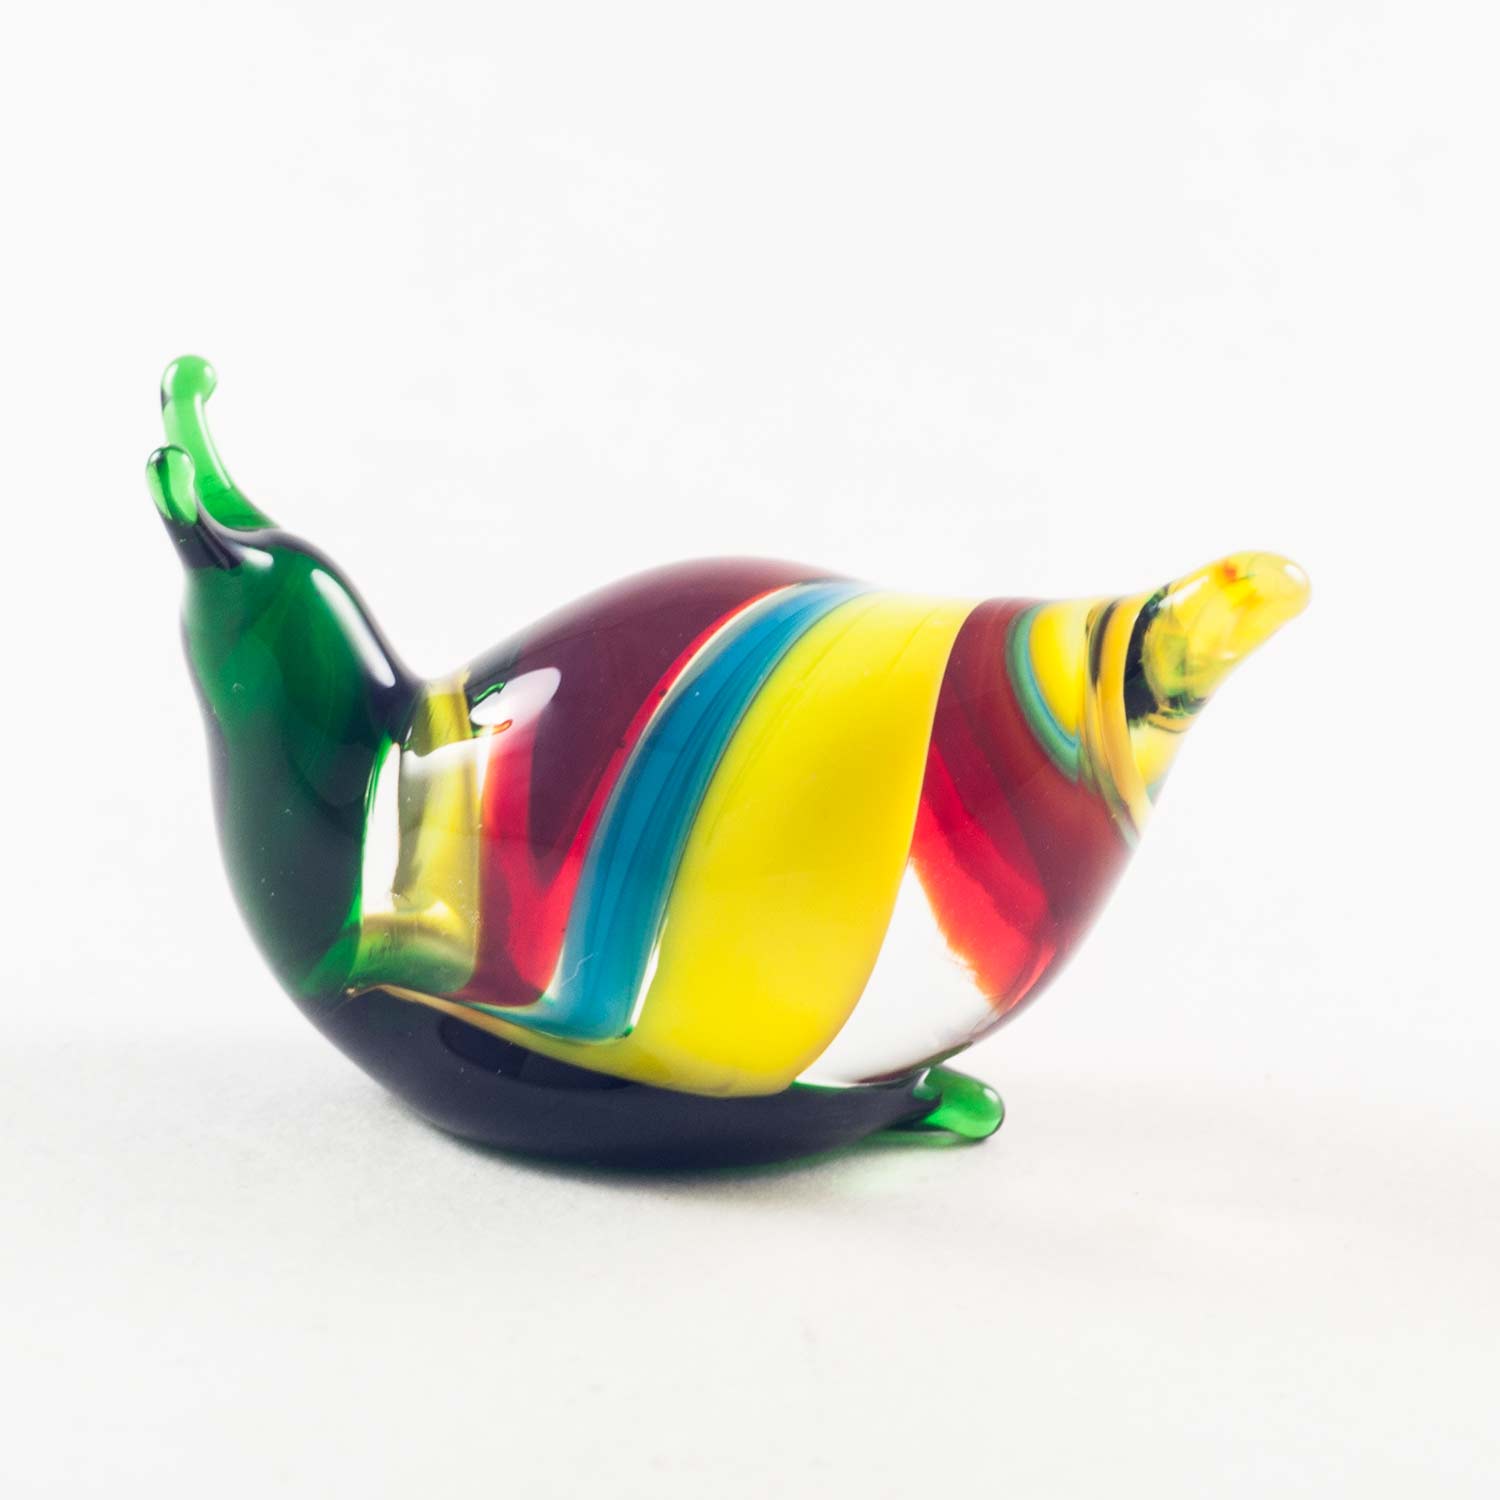 Snail Glass Figurine in Glass Figurines Insects category